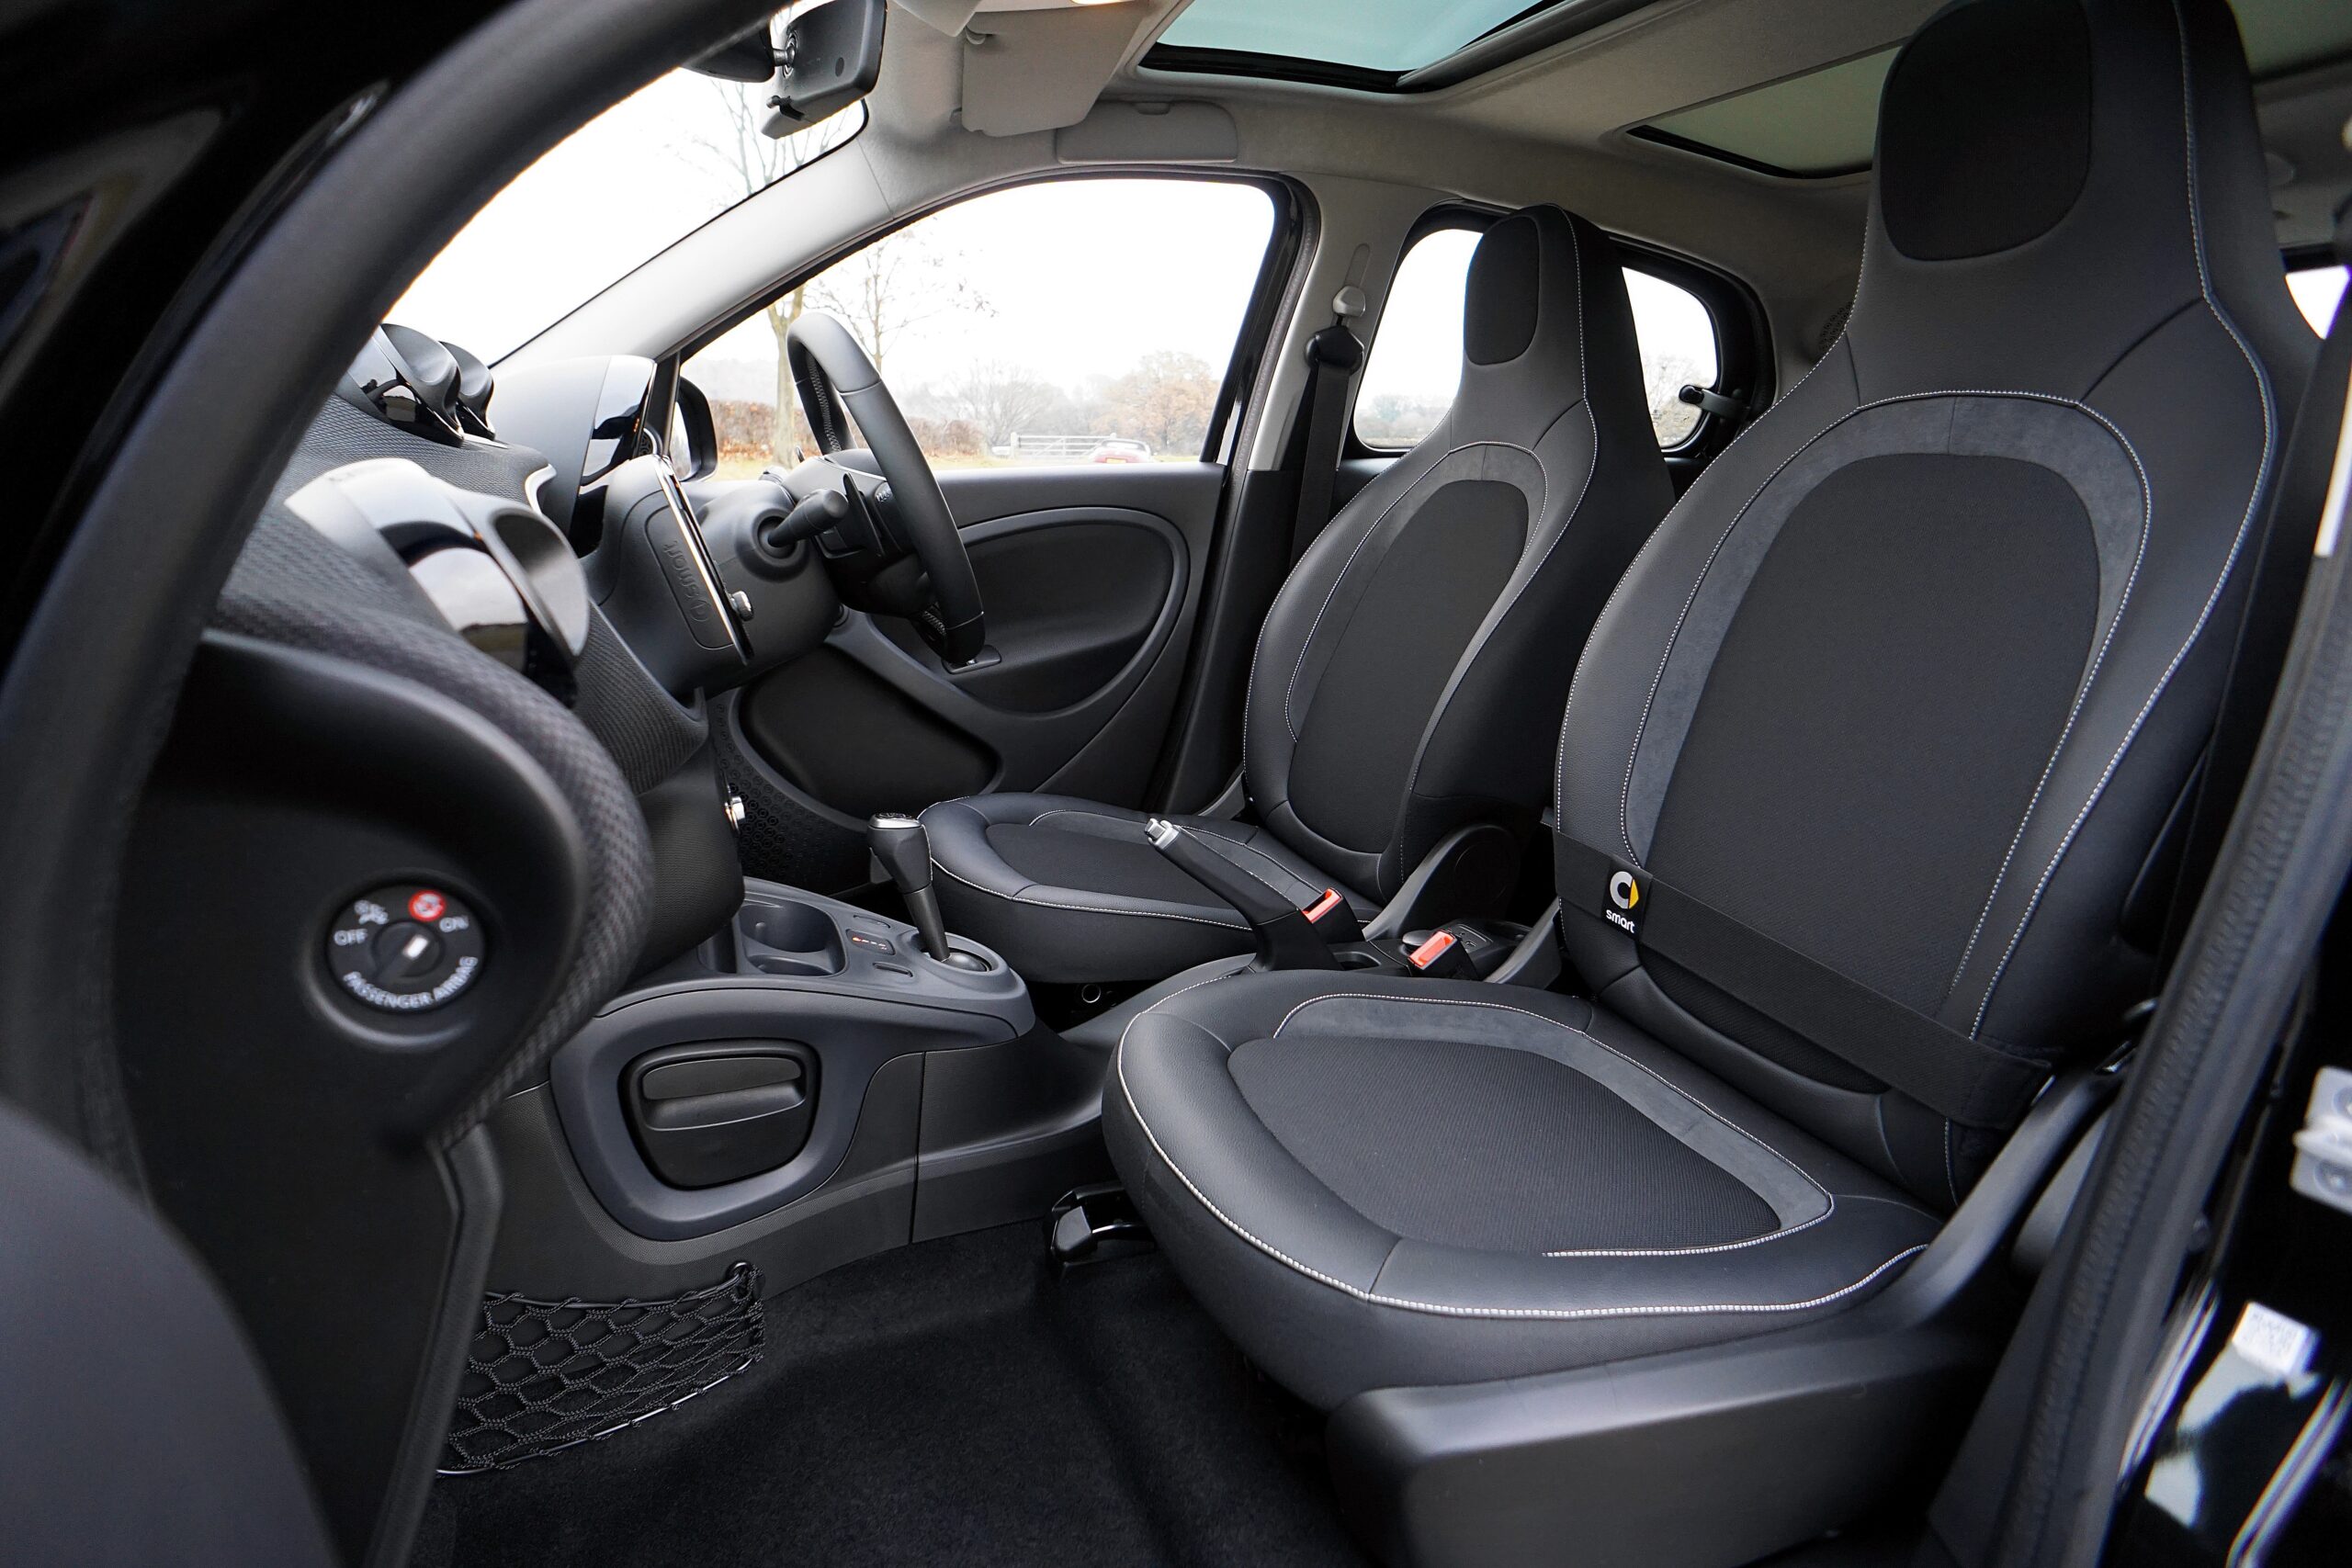 Keep Your Interior Clean with Our Lather, Vinyl, Plastic Interior